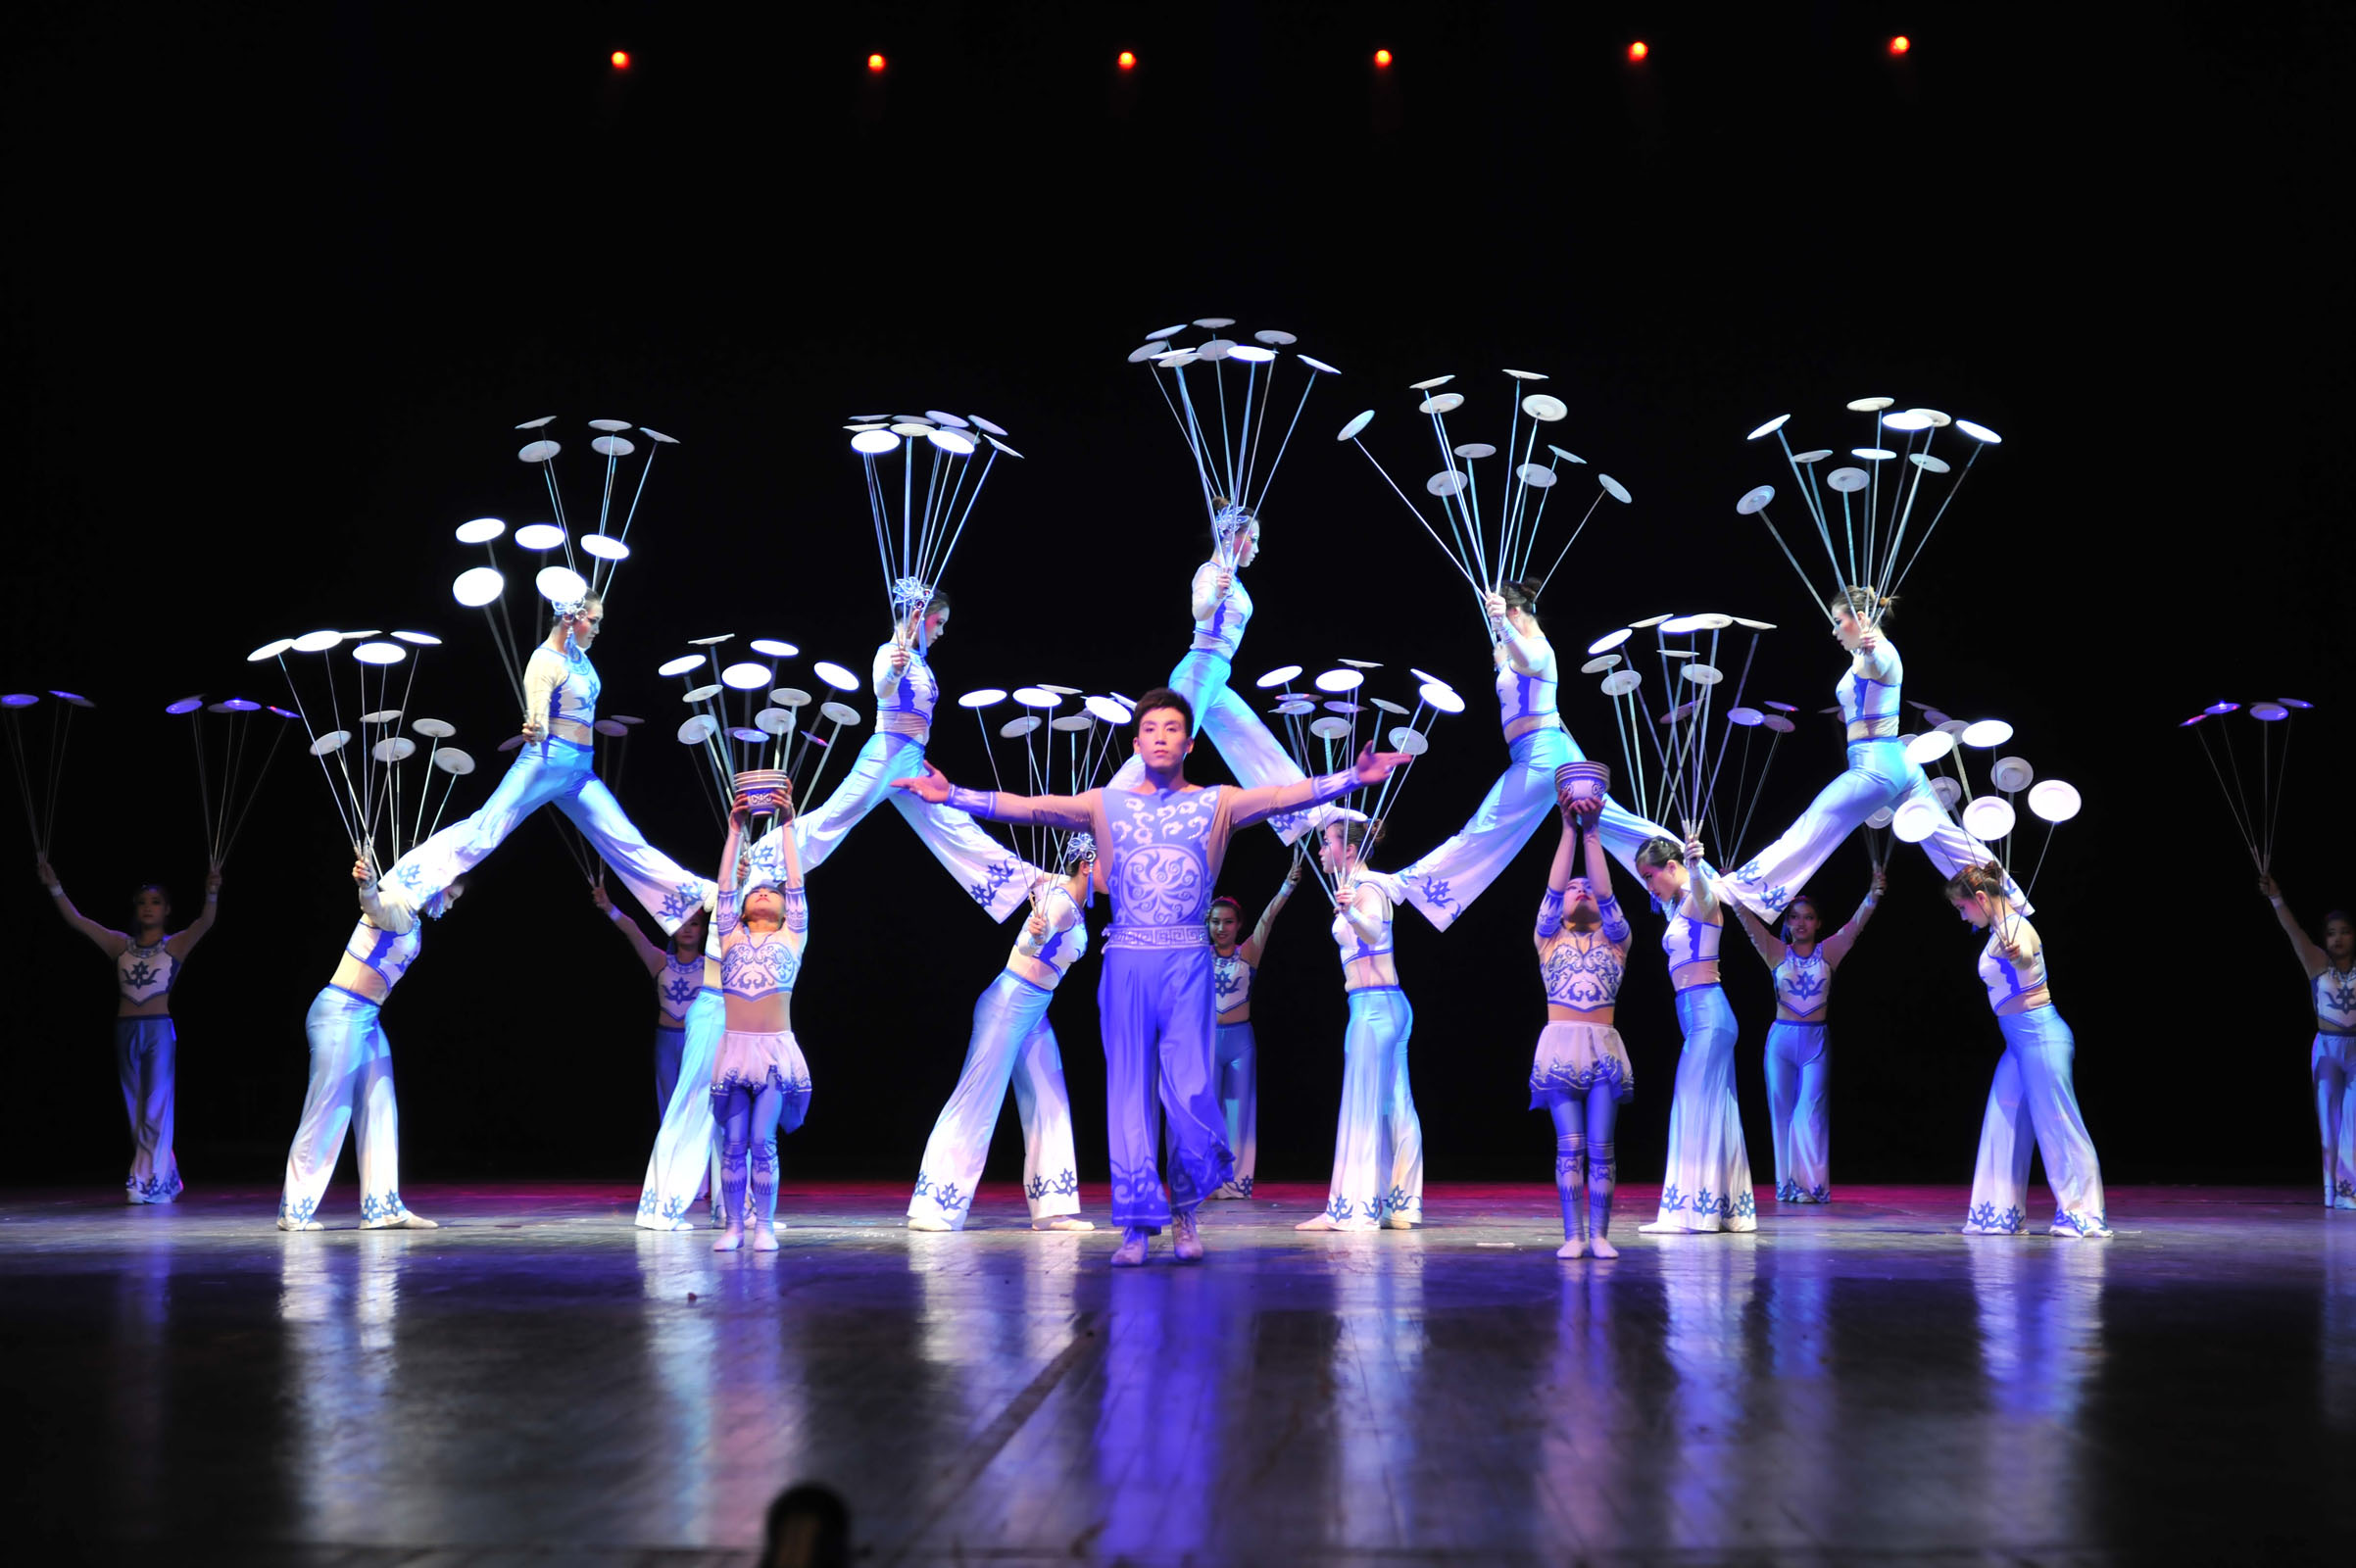 Spectacle D acrobates Brossard Rive Sud Express